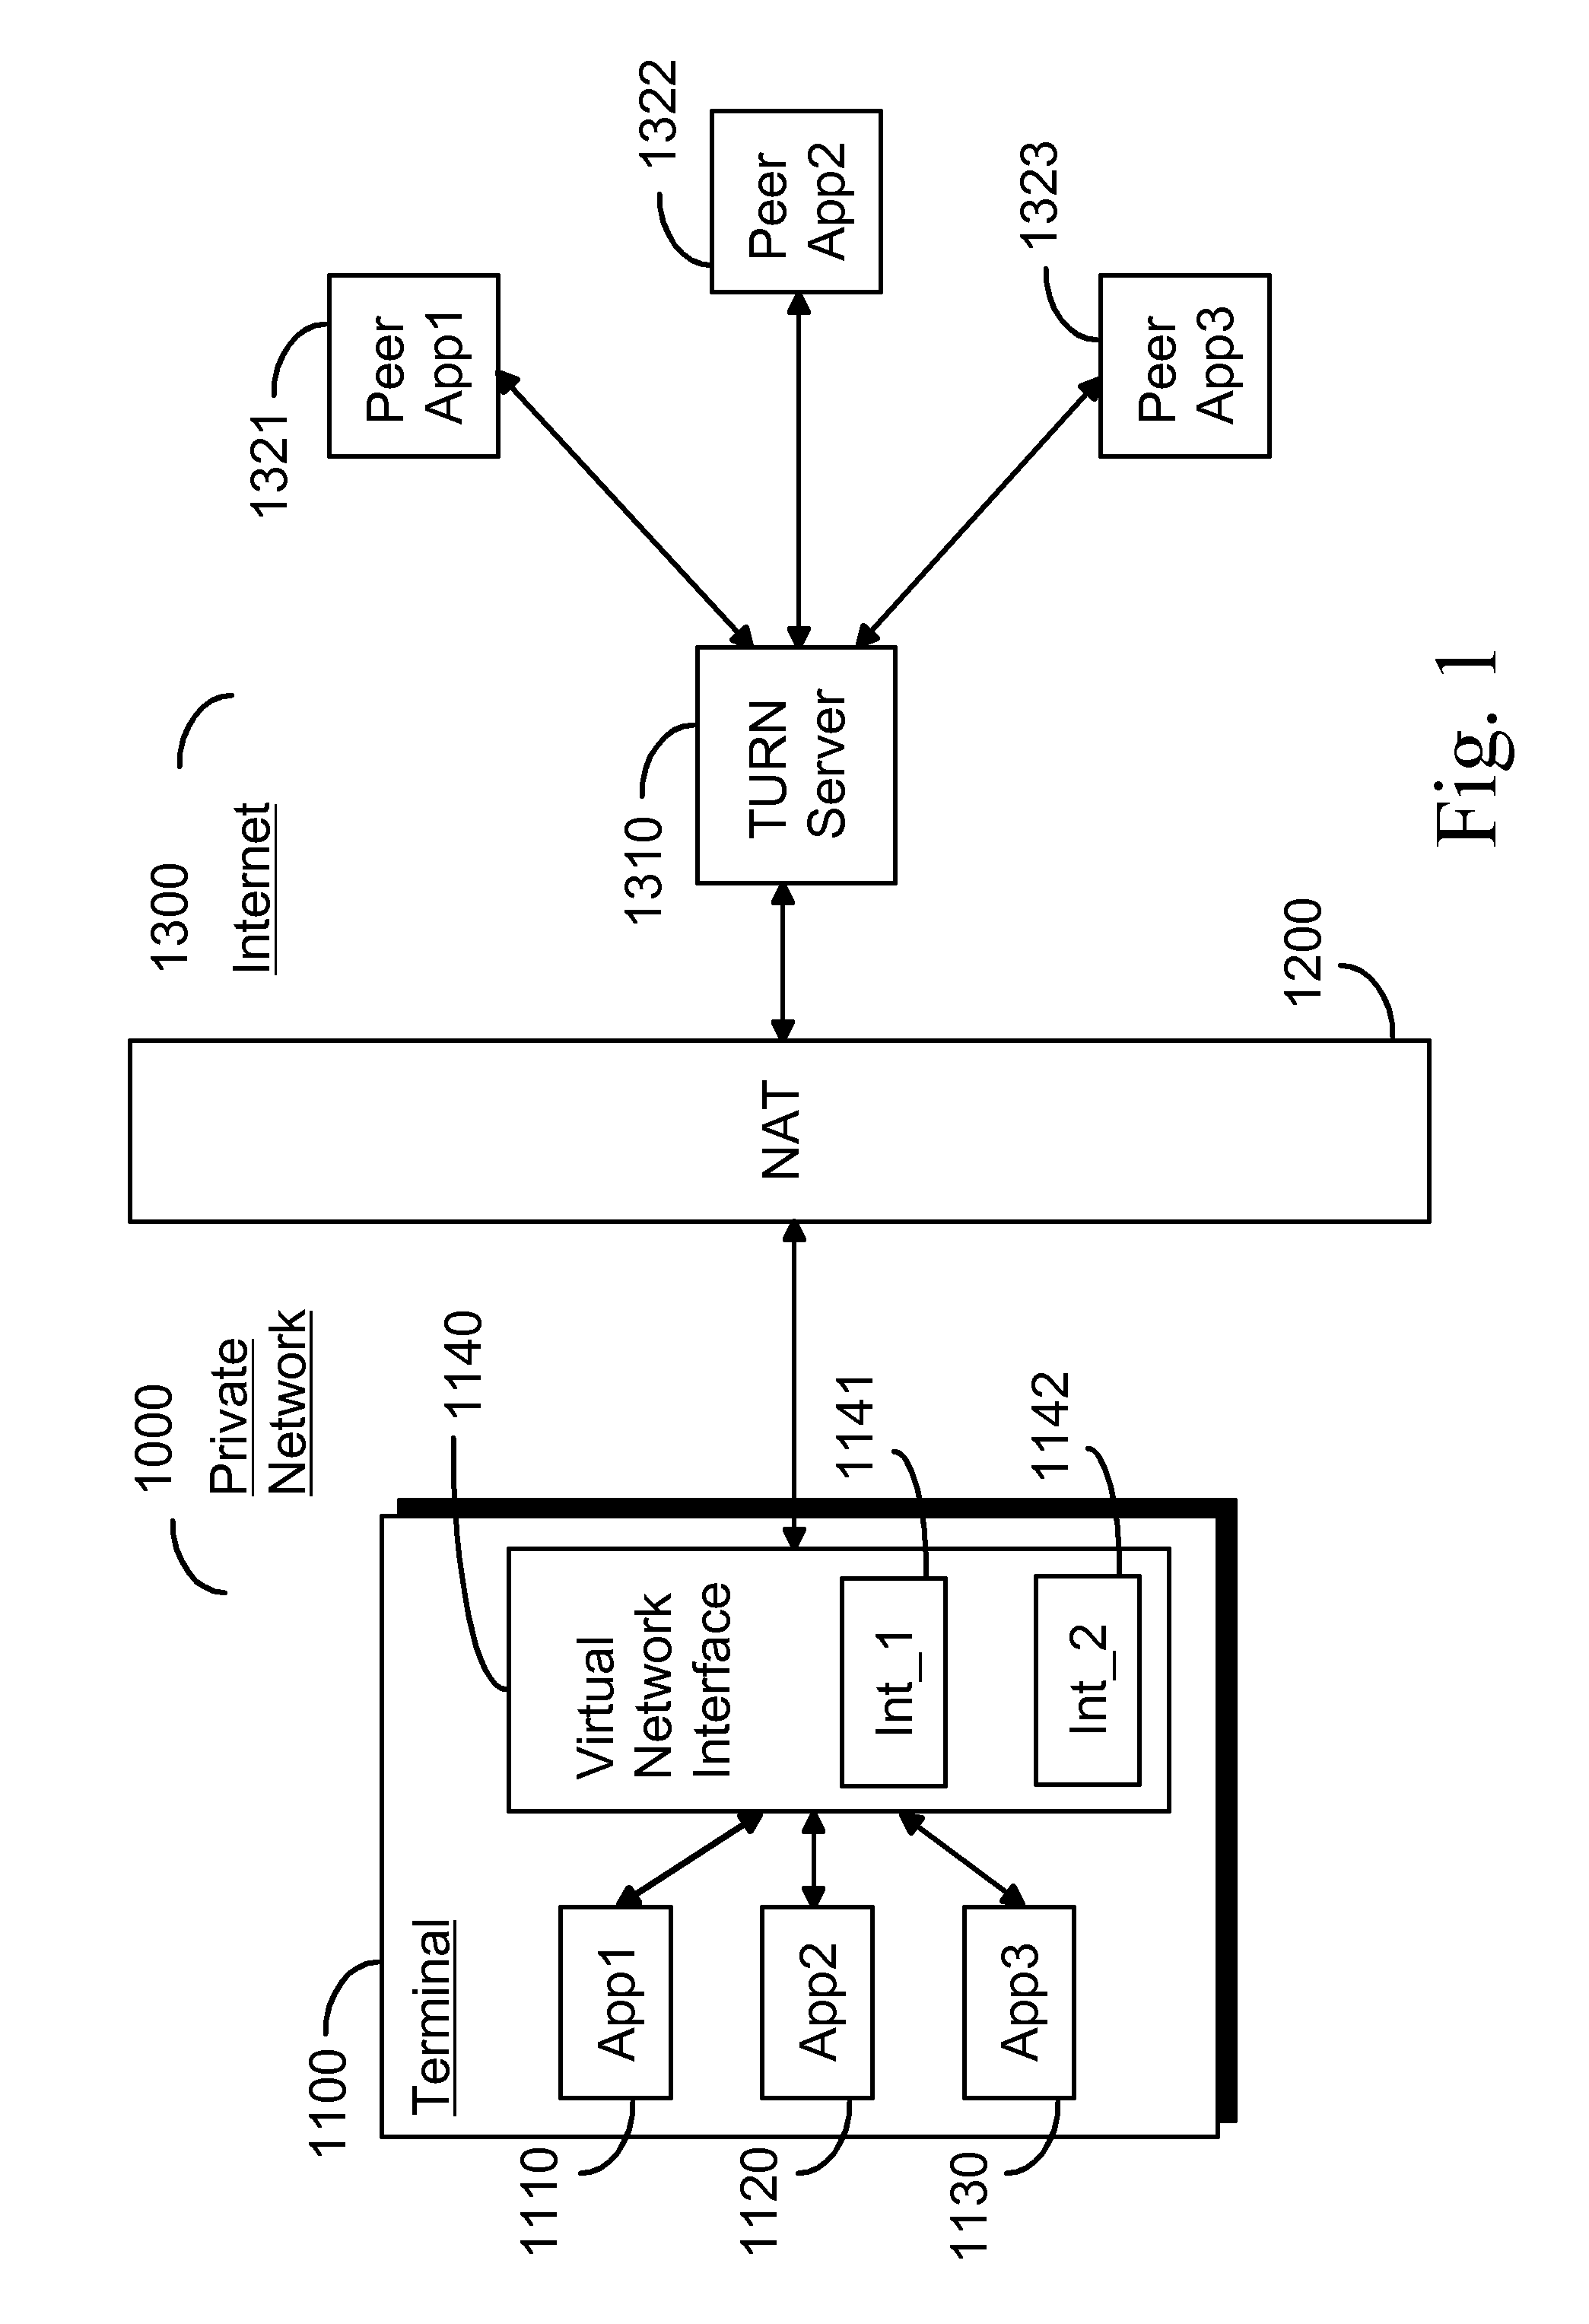 Virtual network interface for relayed NAT traversal